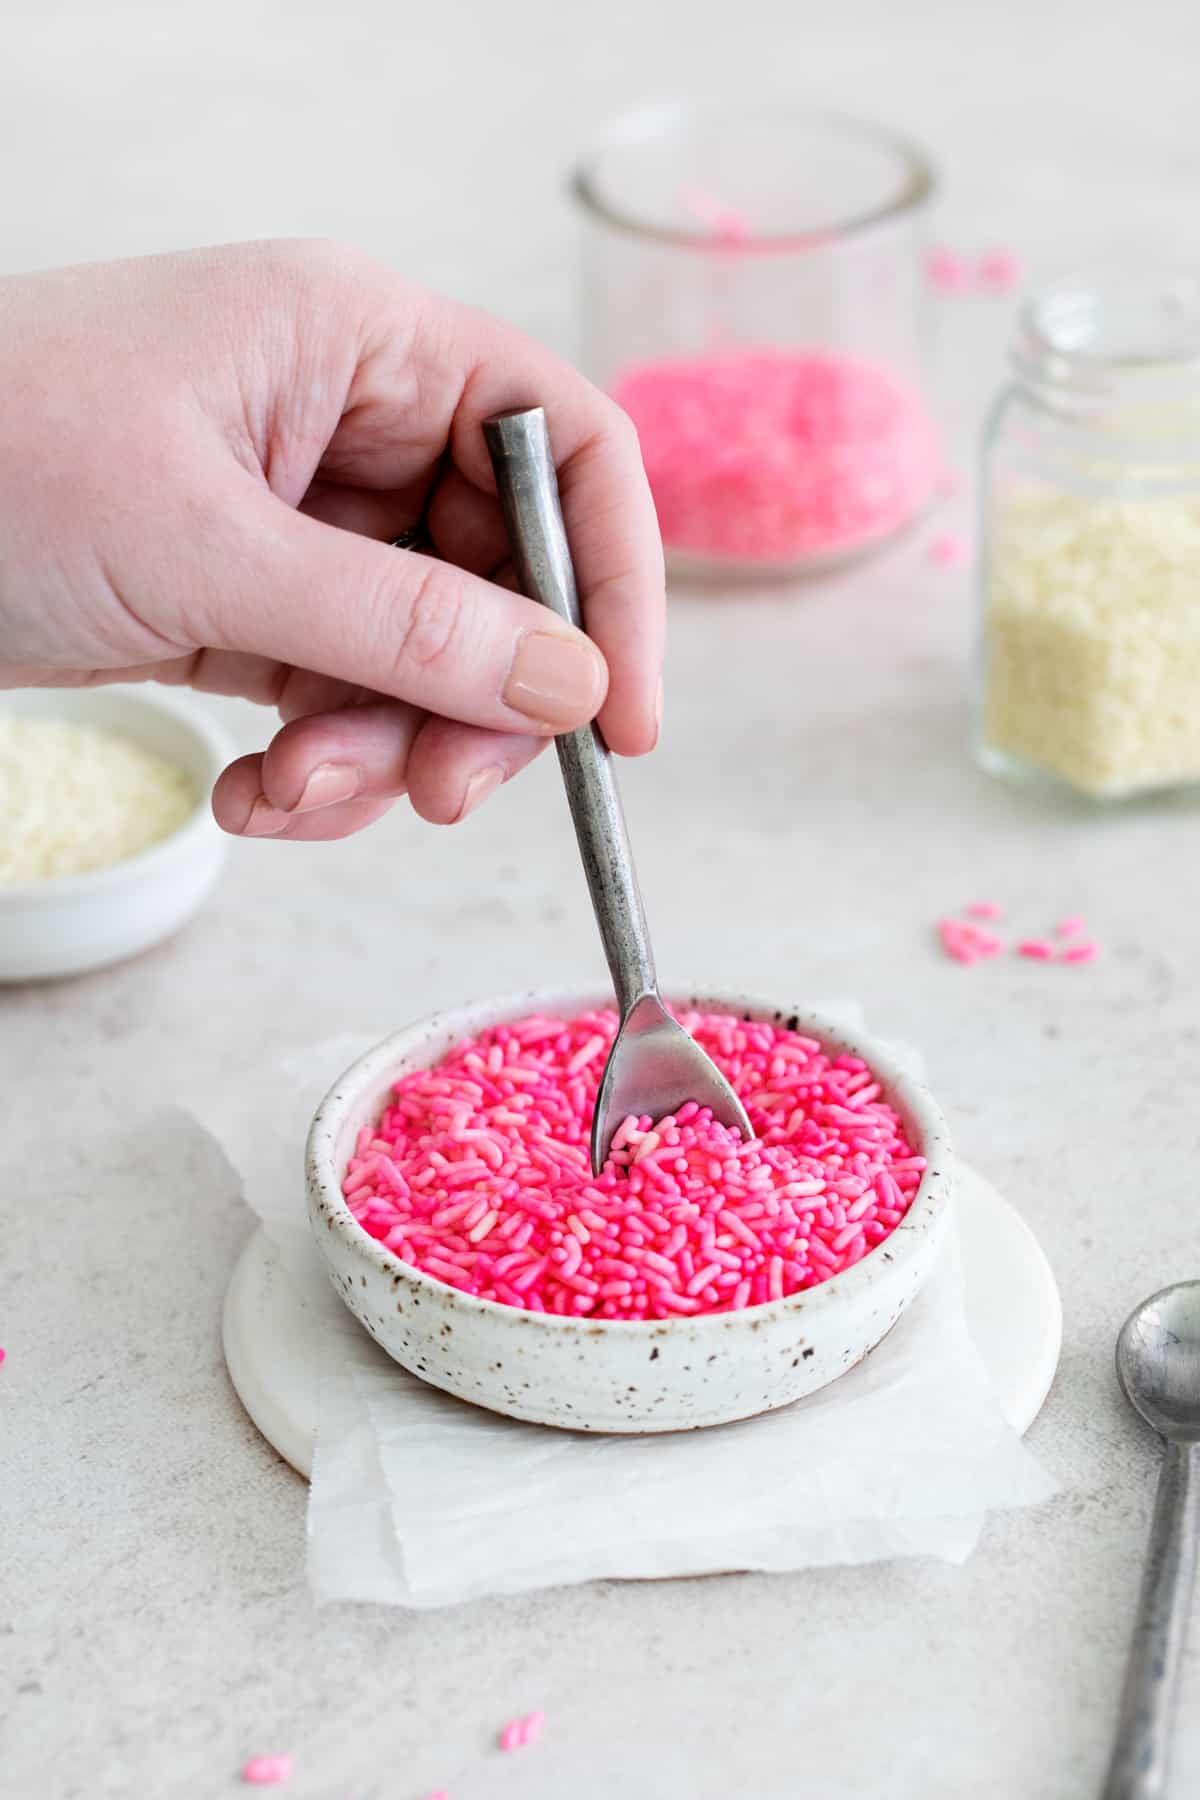 digging into a bowl of colored sprinkles with a small spoon